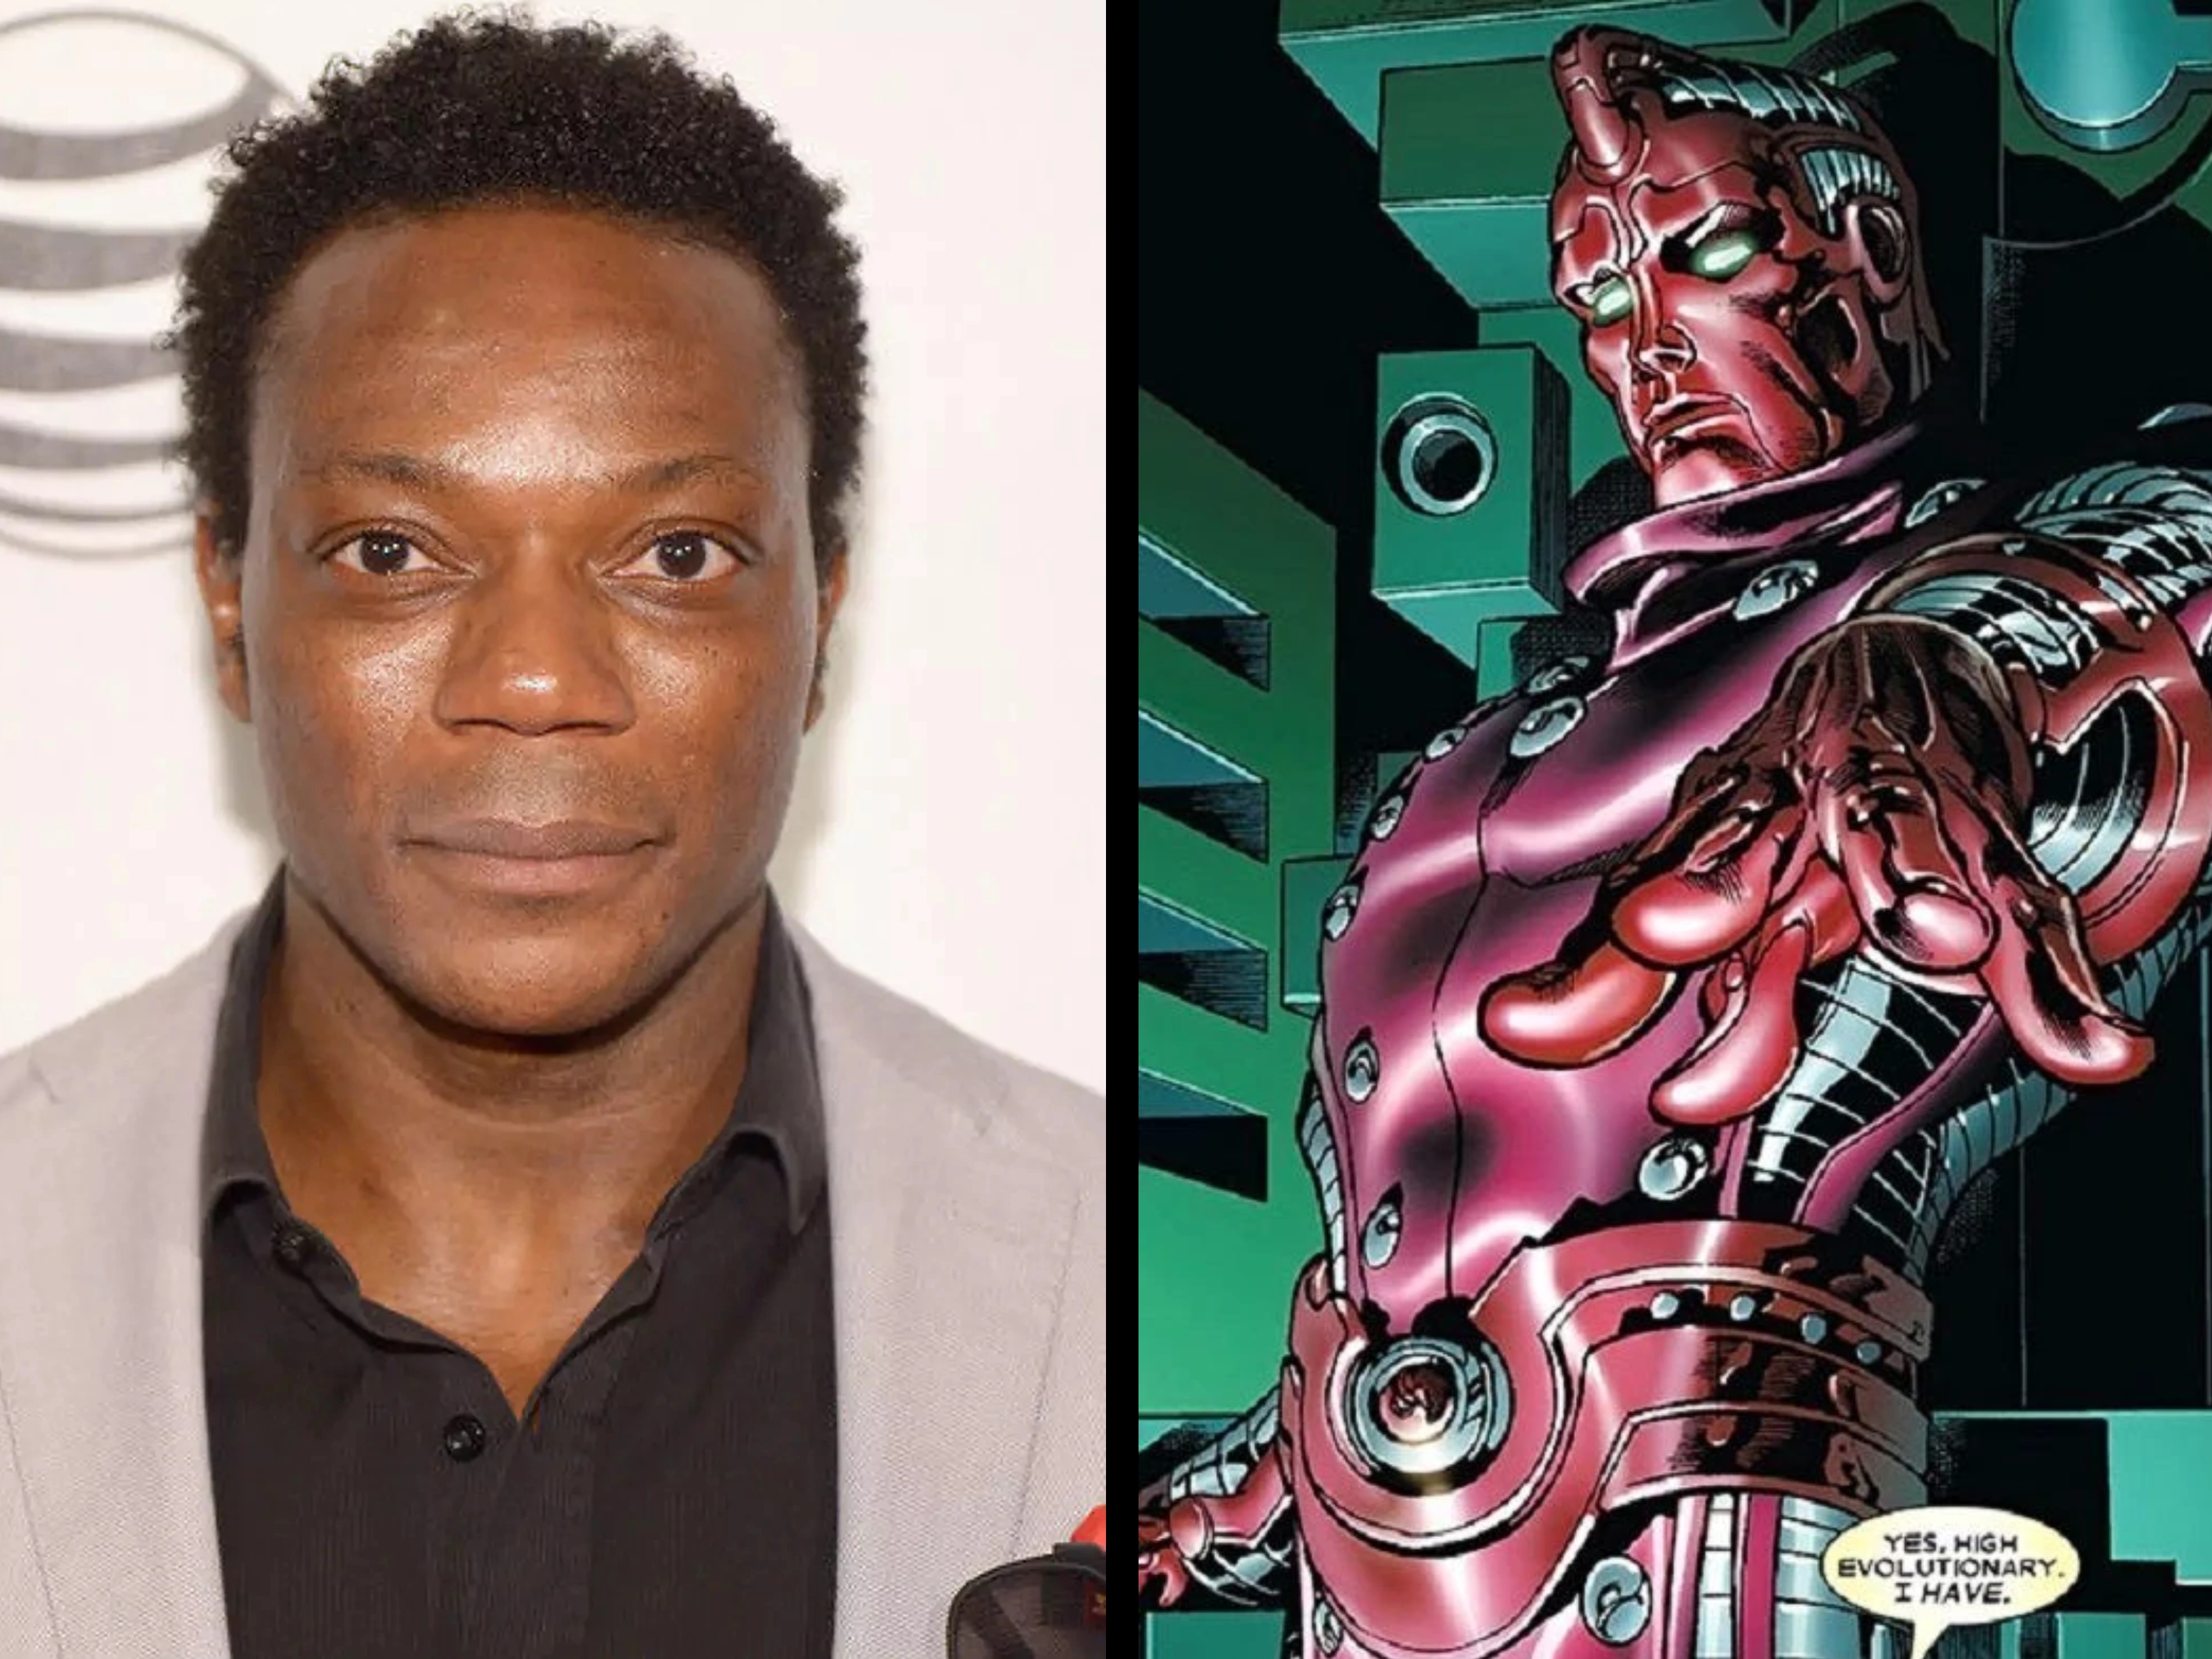 New Set Photos Seemingly Confirm the High Evolutionary for ‘Guardians of the Galaxy Vol. 3’